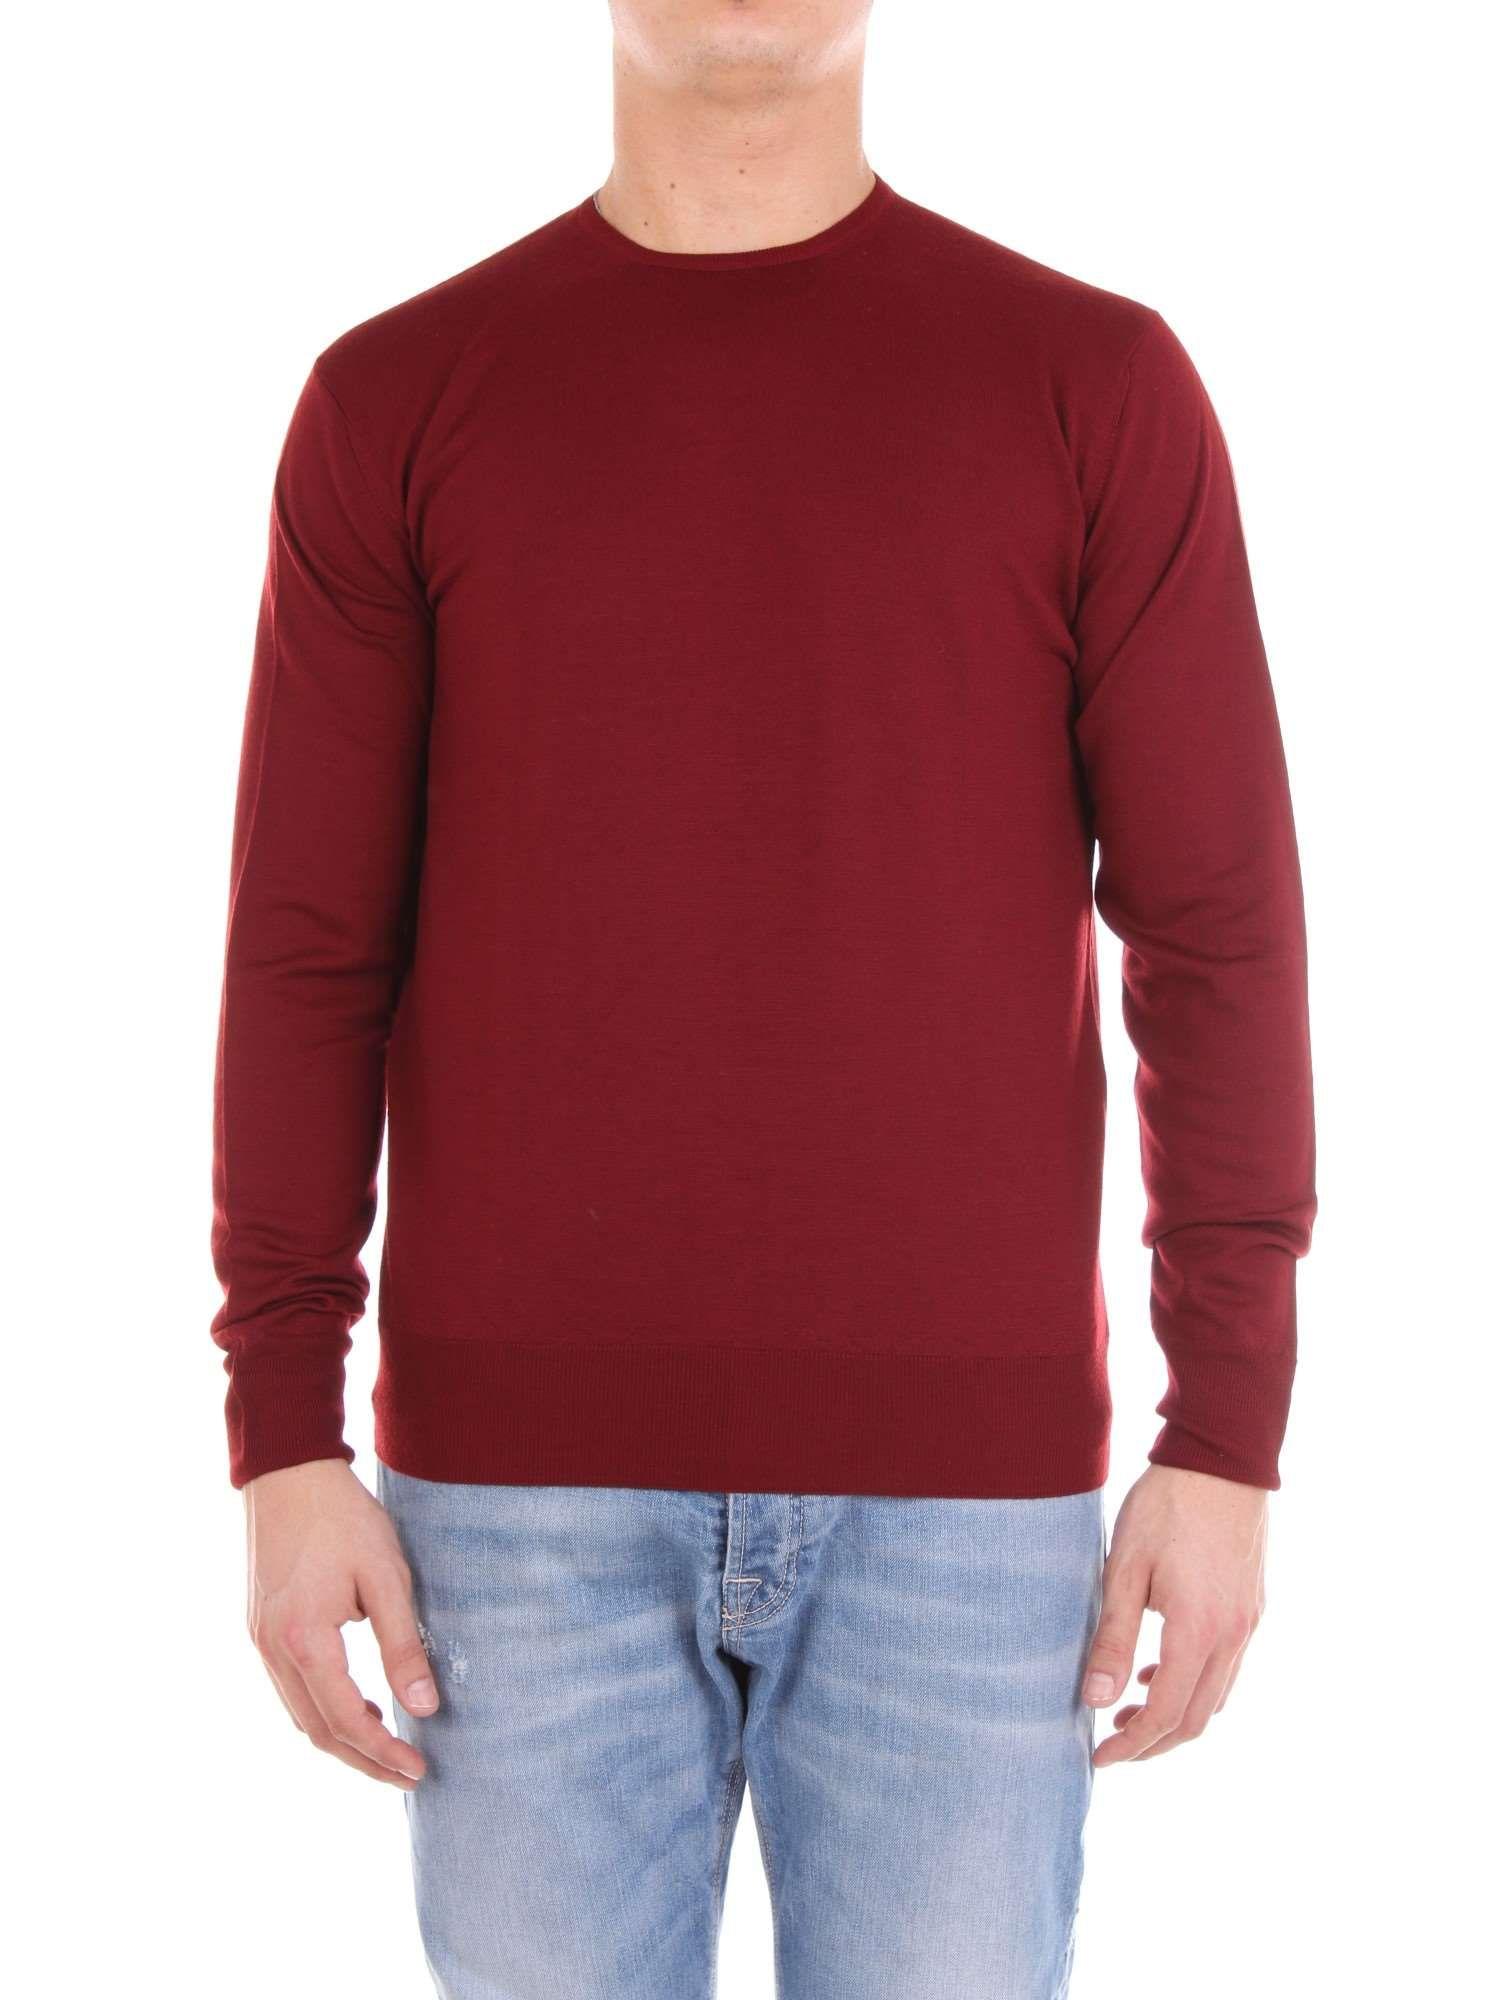 Cruciani Burgundy Wool Sweater in Red for Men - Save 15% - Lyst